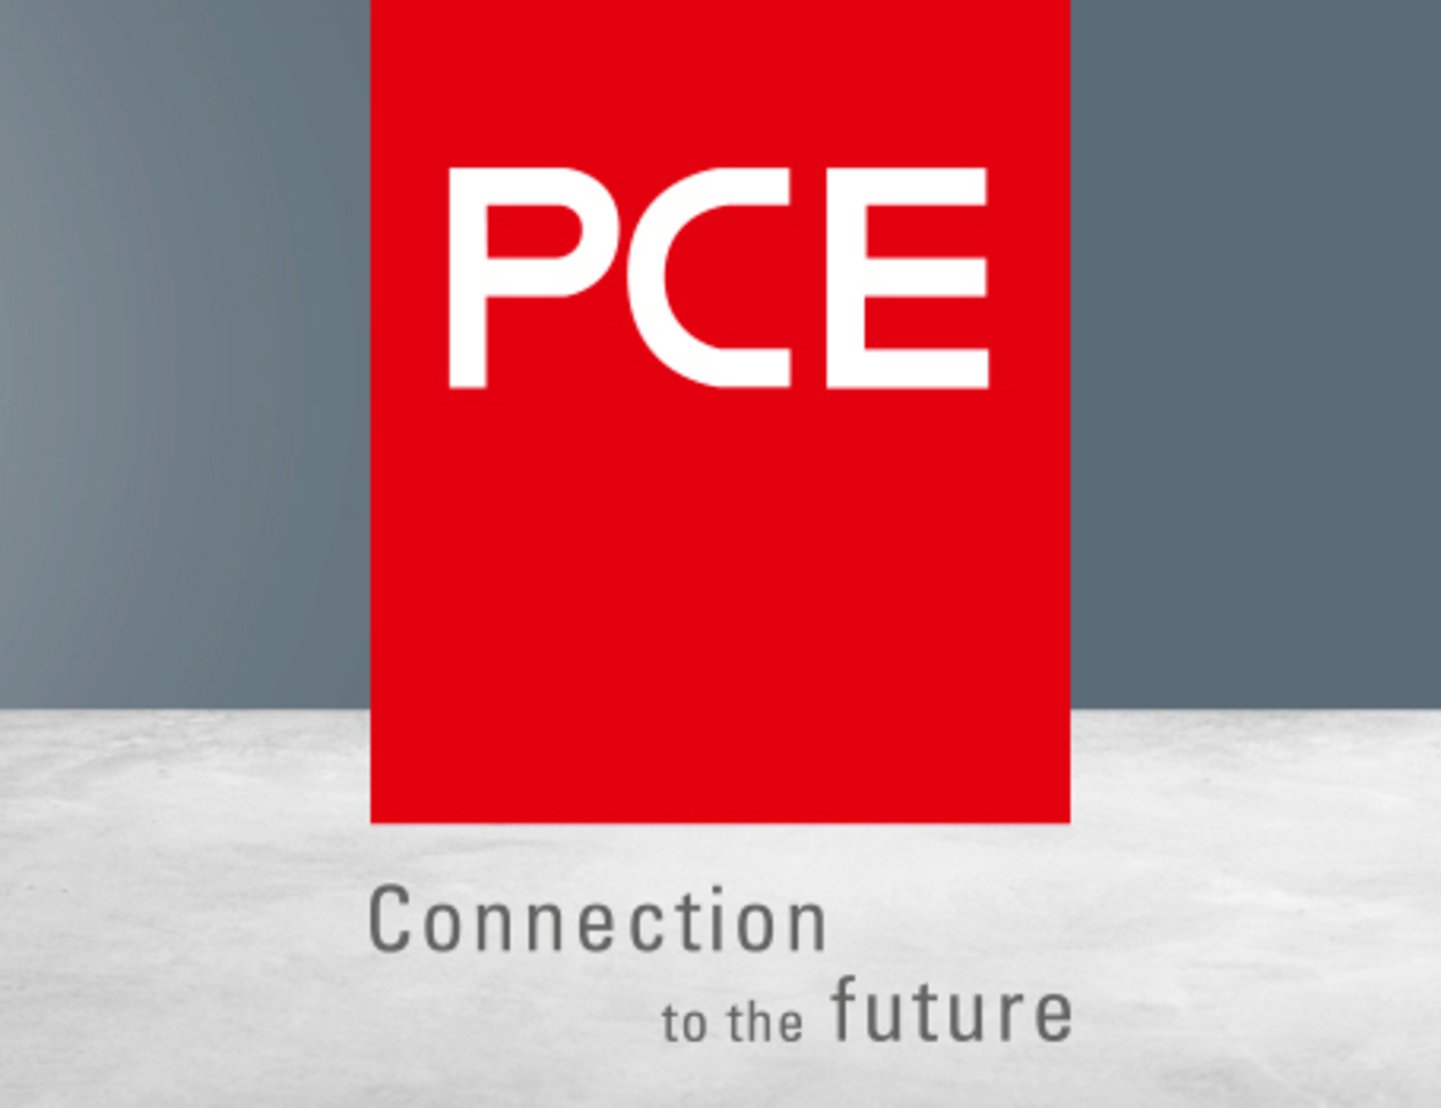 PC ELECTRIC GESMBH - Connection to the future